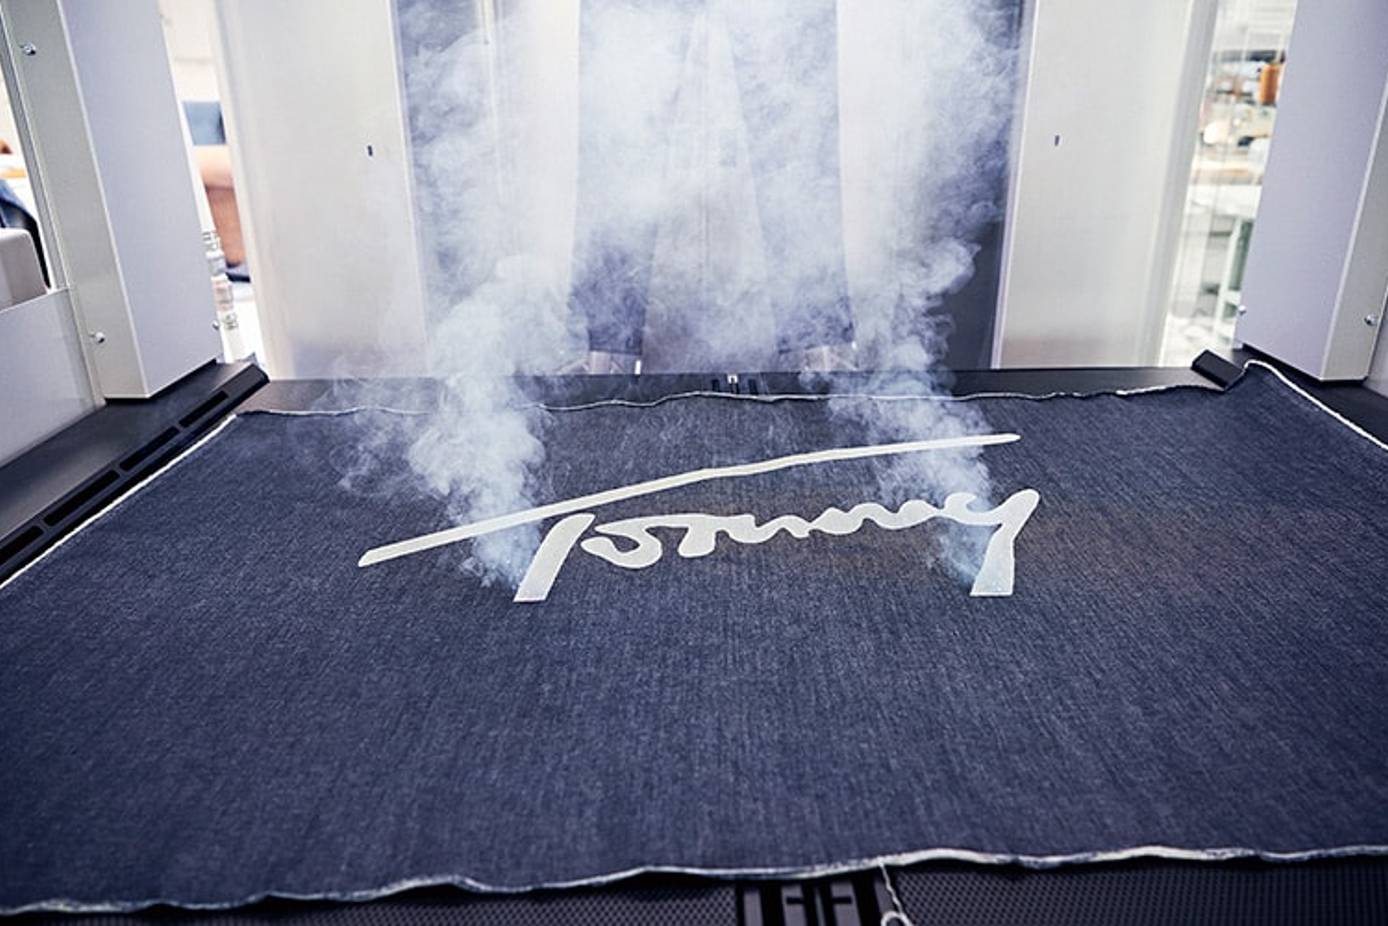 Driving sustainability: A inside the Tommy denim centre